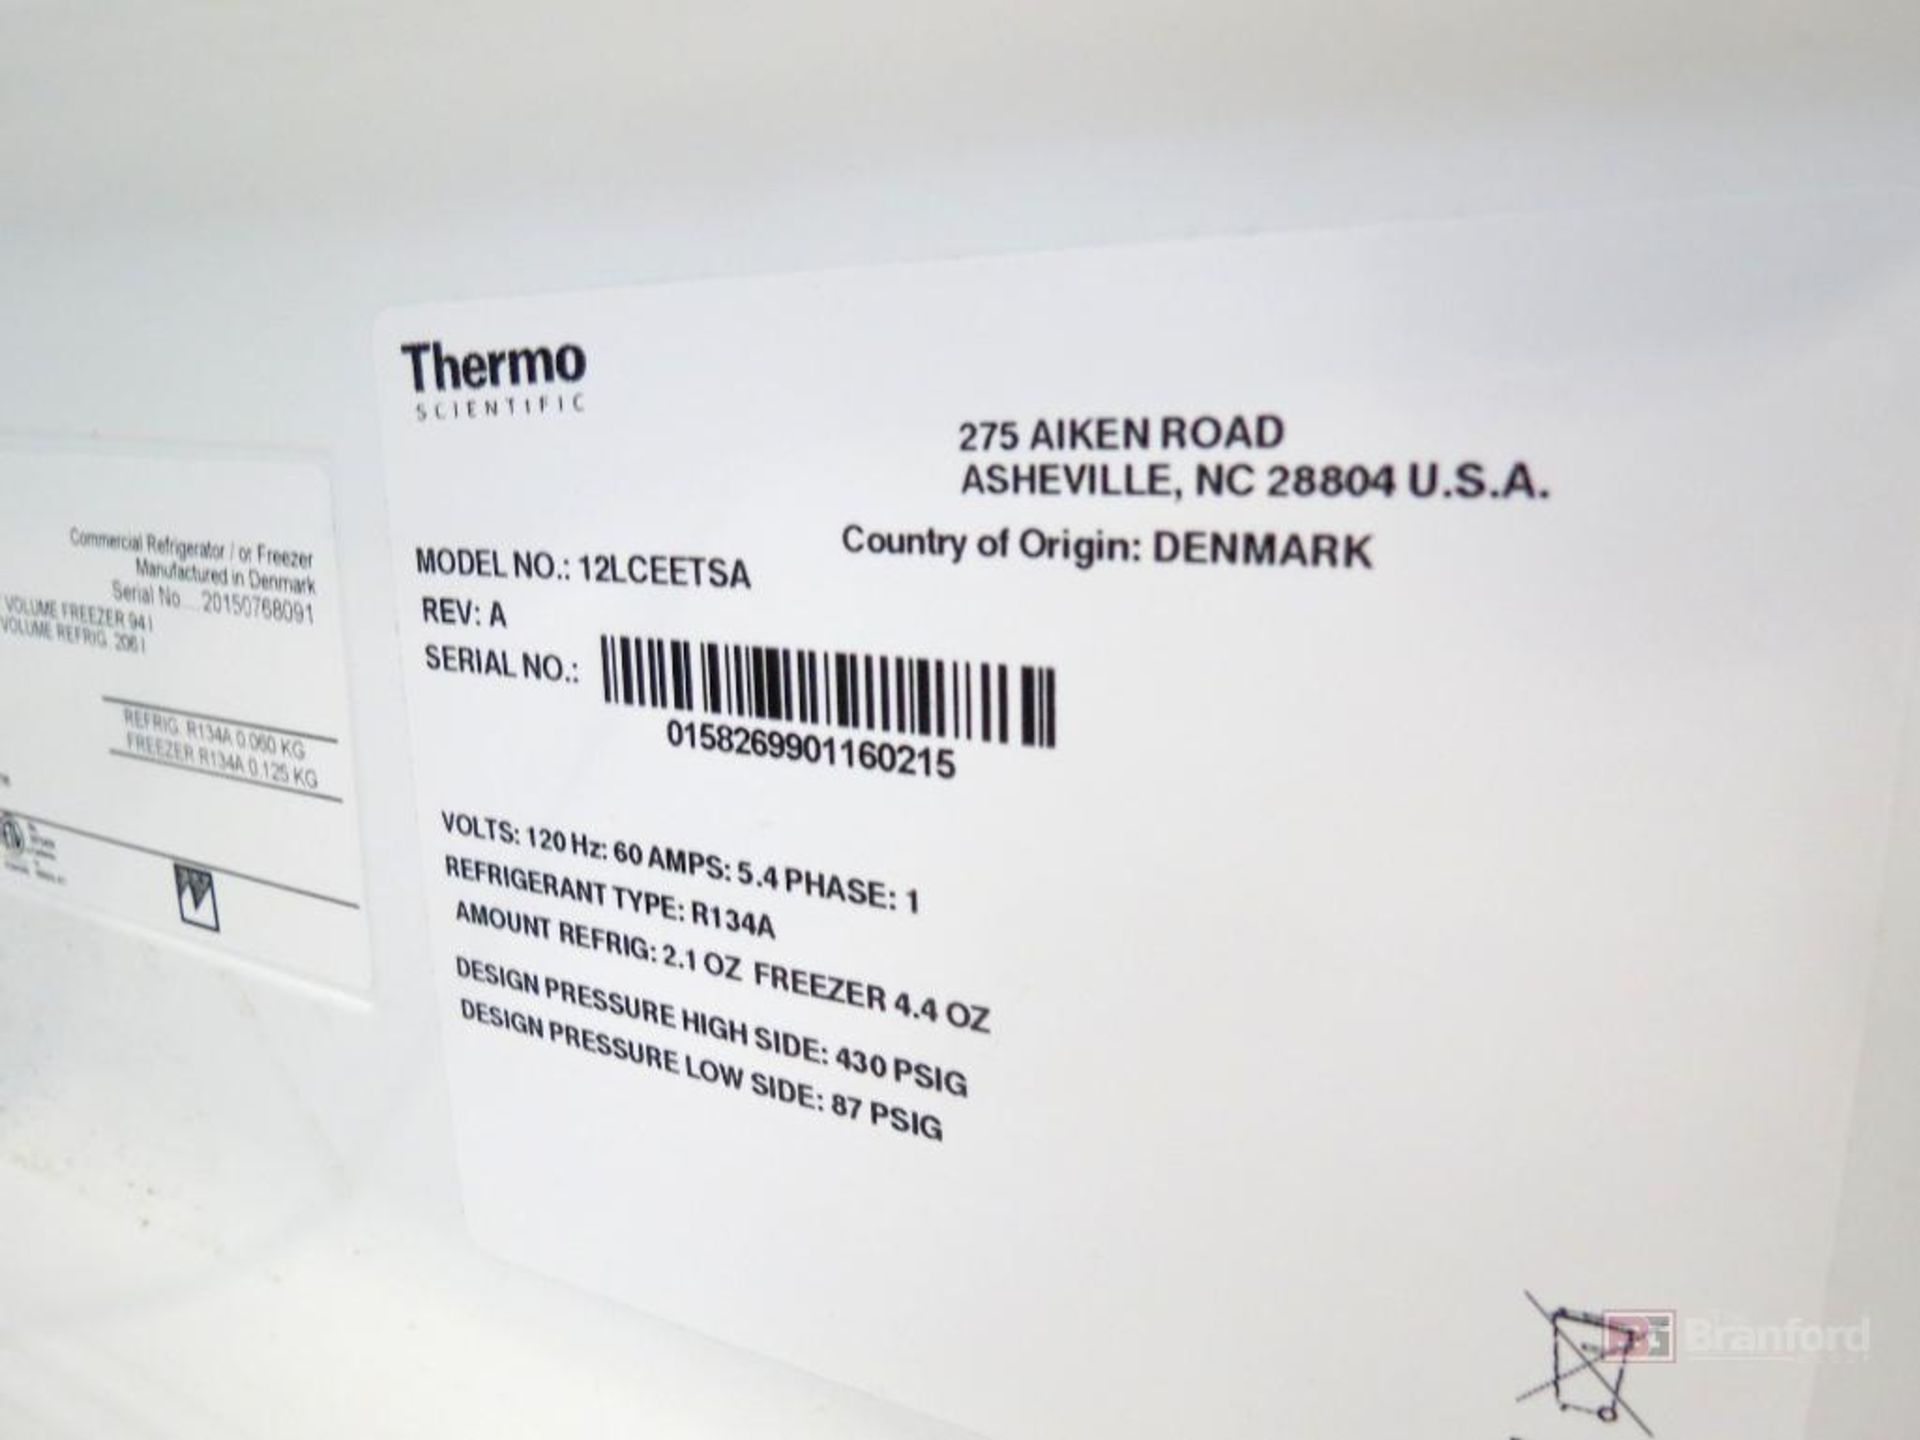 Thermo 12LCEETSA Double Stack Refrigerator - Image 5 of 5